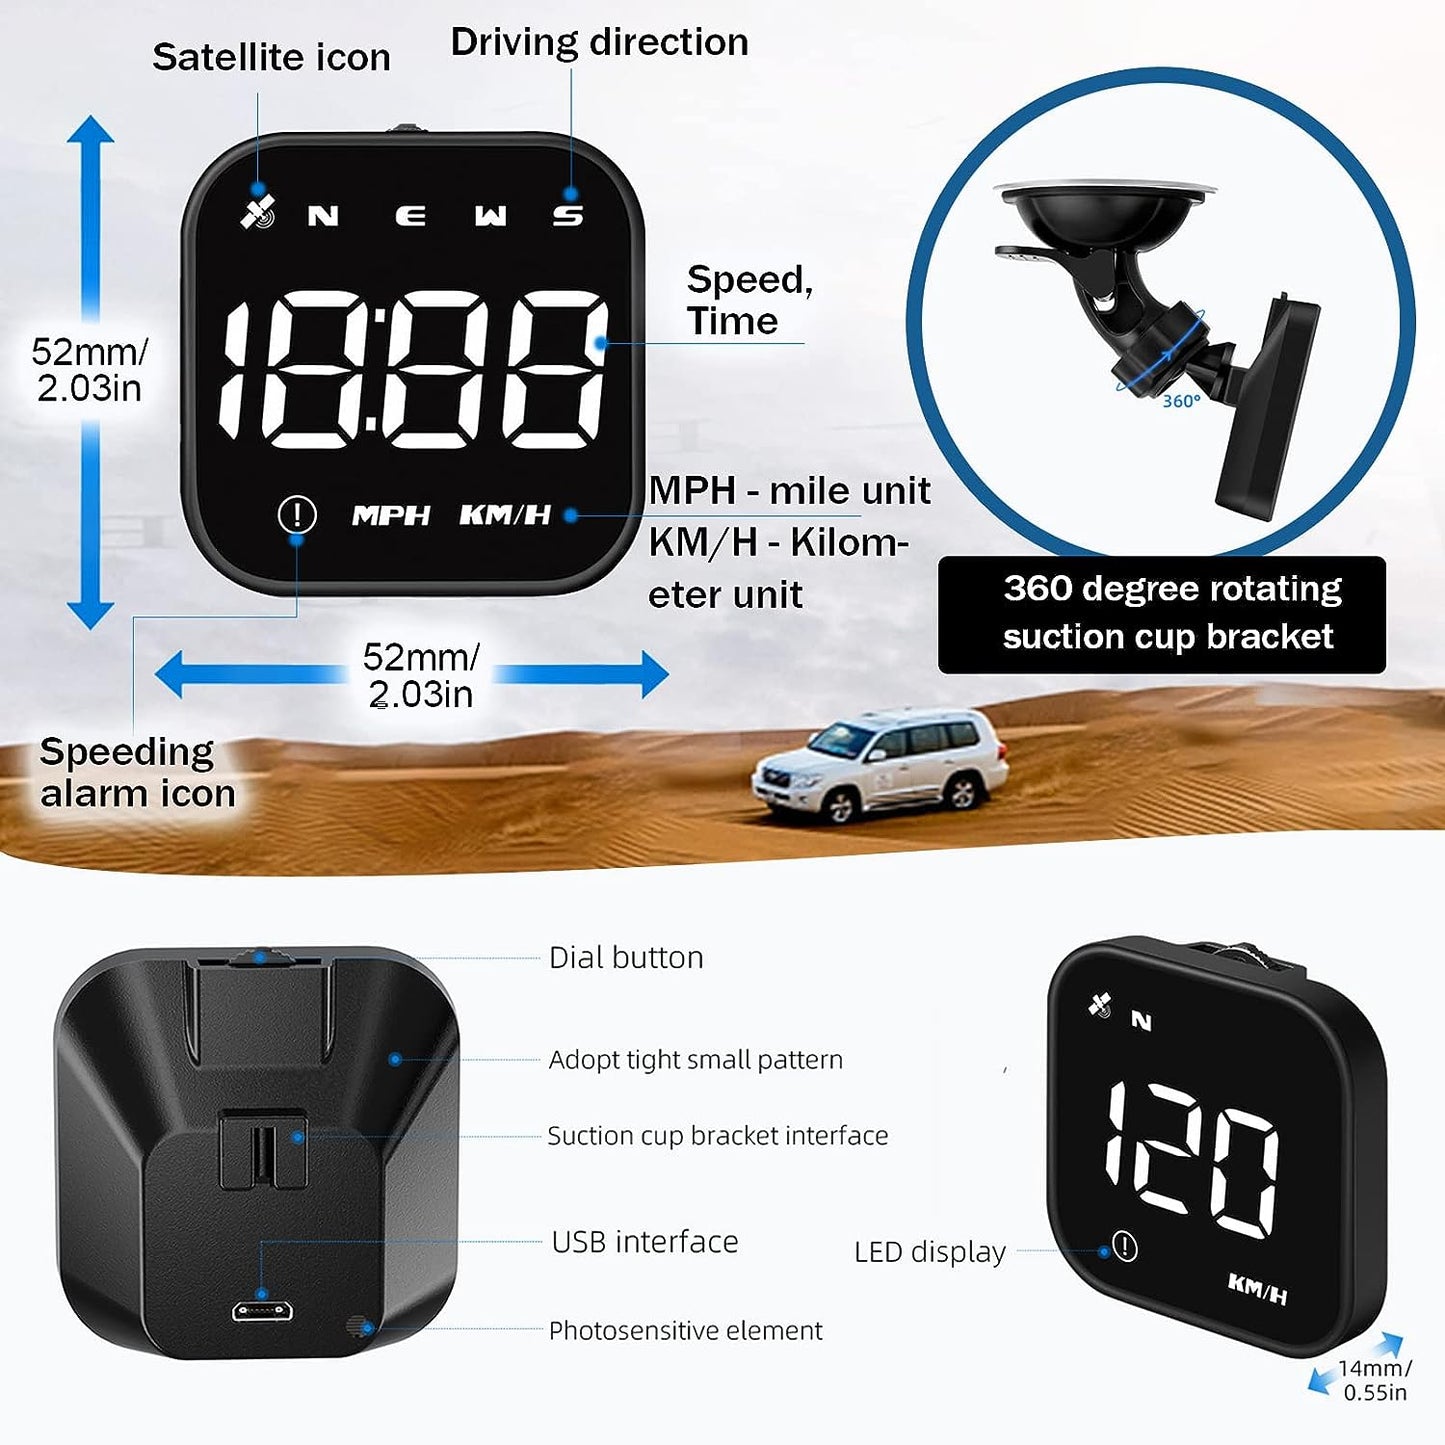 Head Up Display Car Universal Digital GPS Speedometer with Speed MPH, Compass Driving Direction, Fatigue Driving Reminder, Overspeed Alarm Trip Meter, for All Vehicle iKiKin G4S